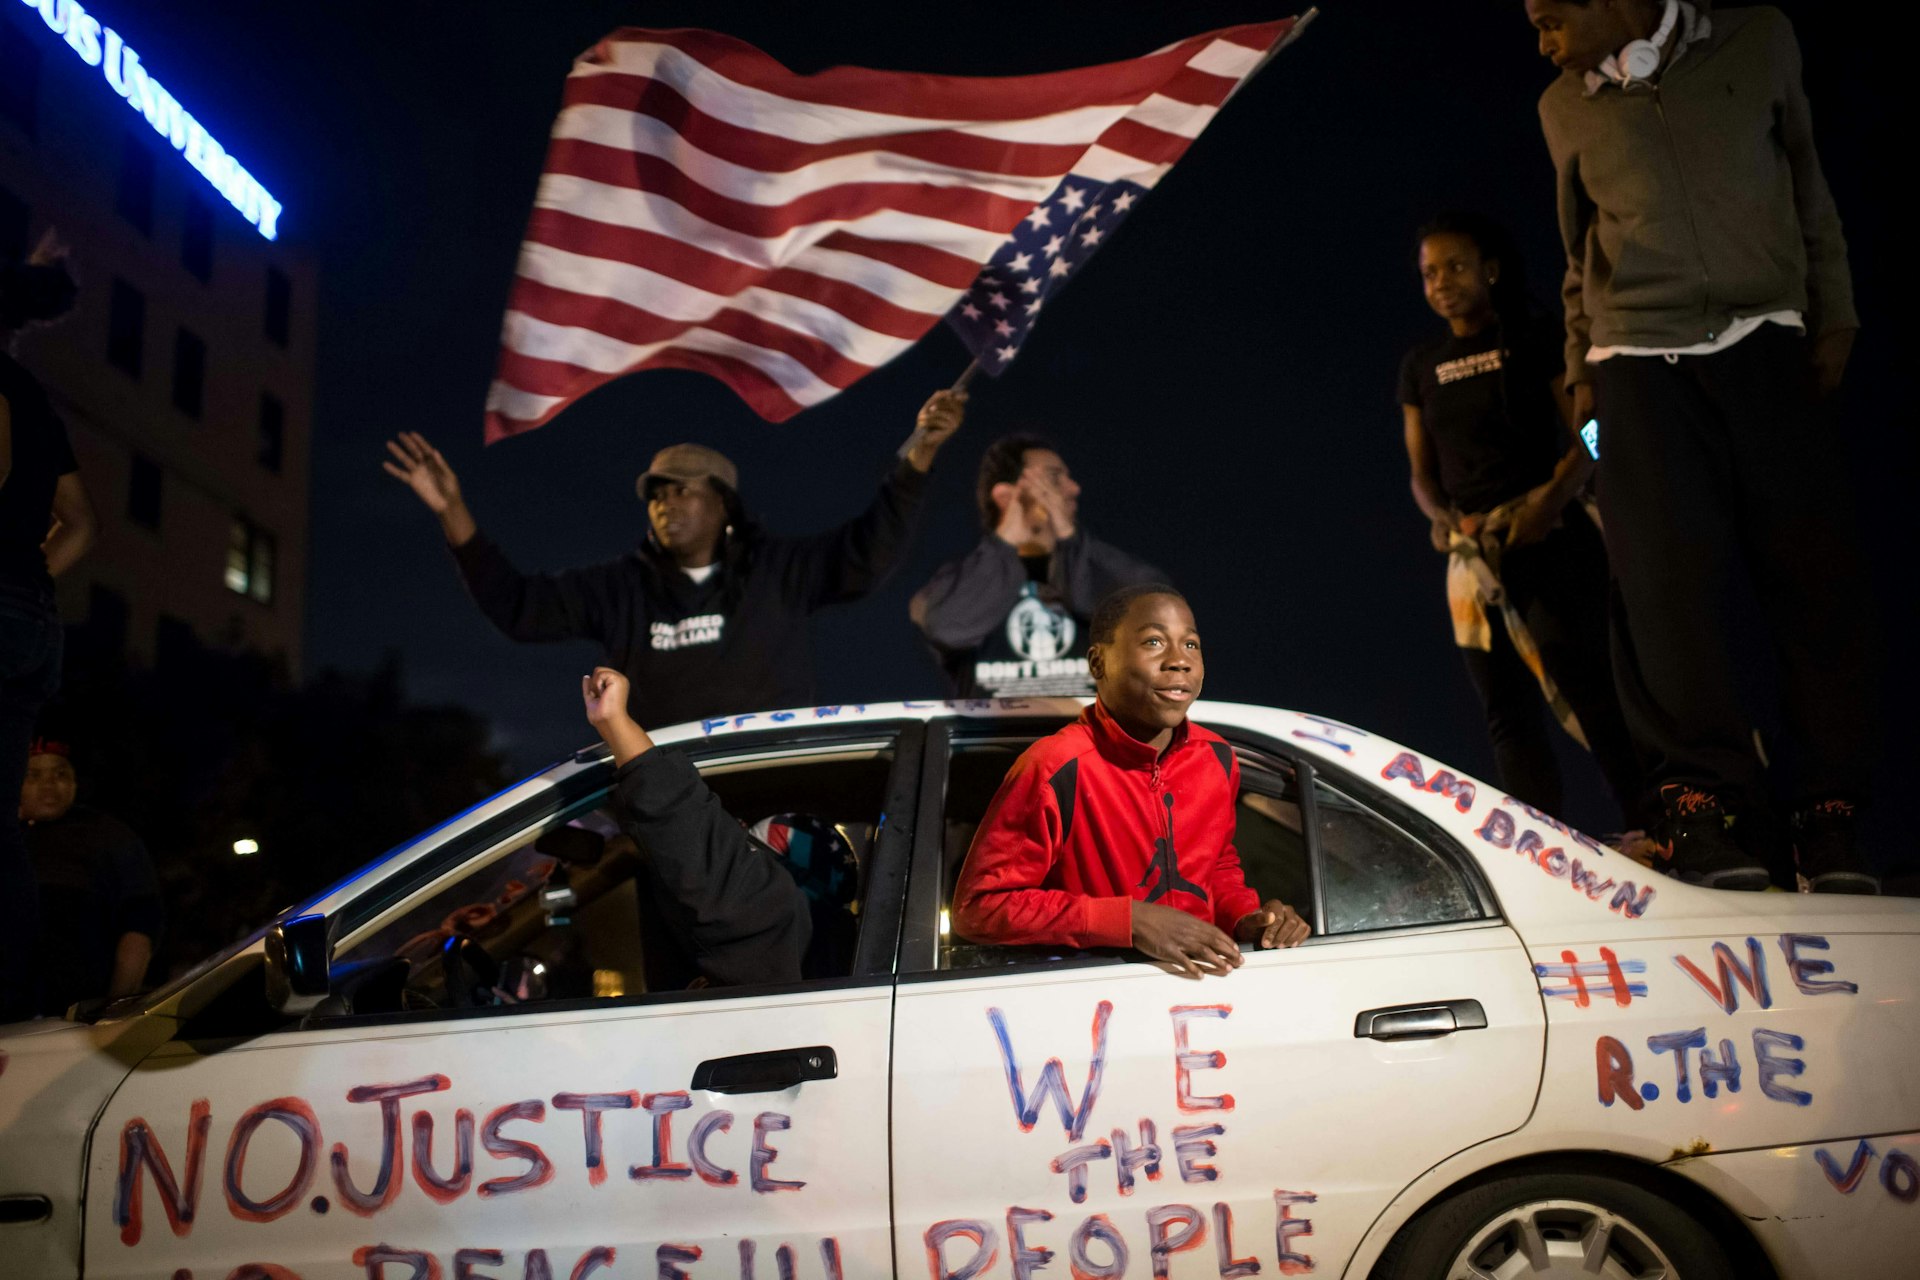 One year after Mike Brown: where are we now?